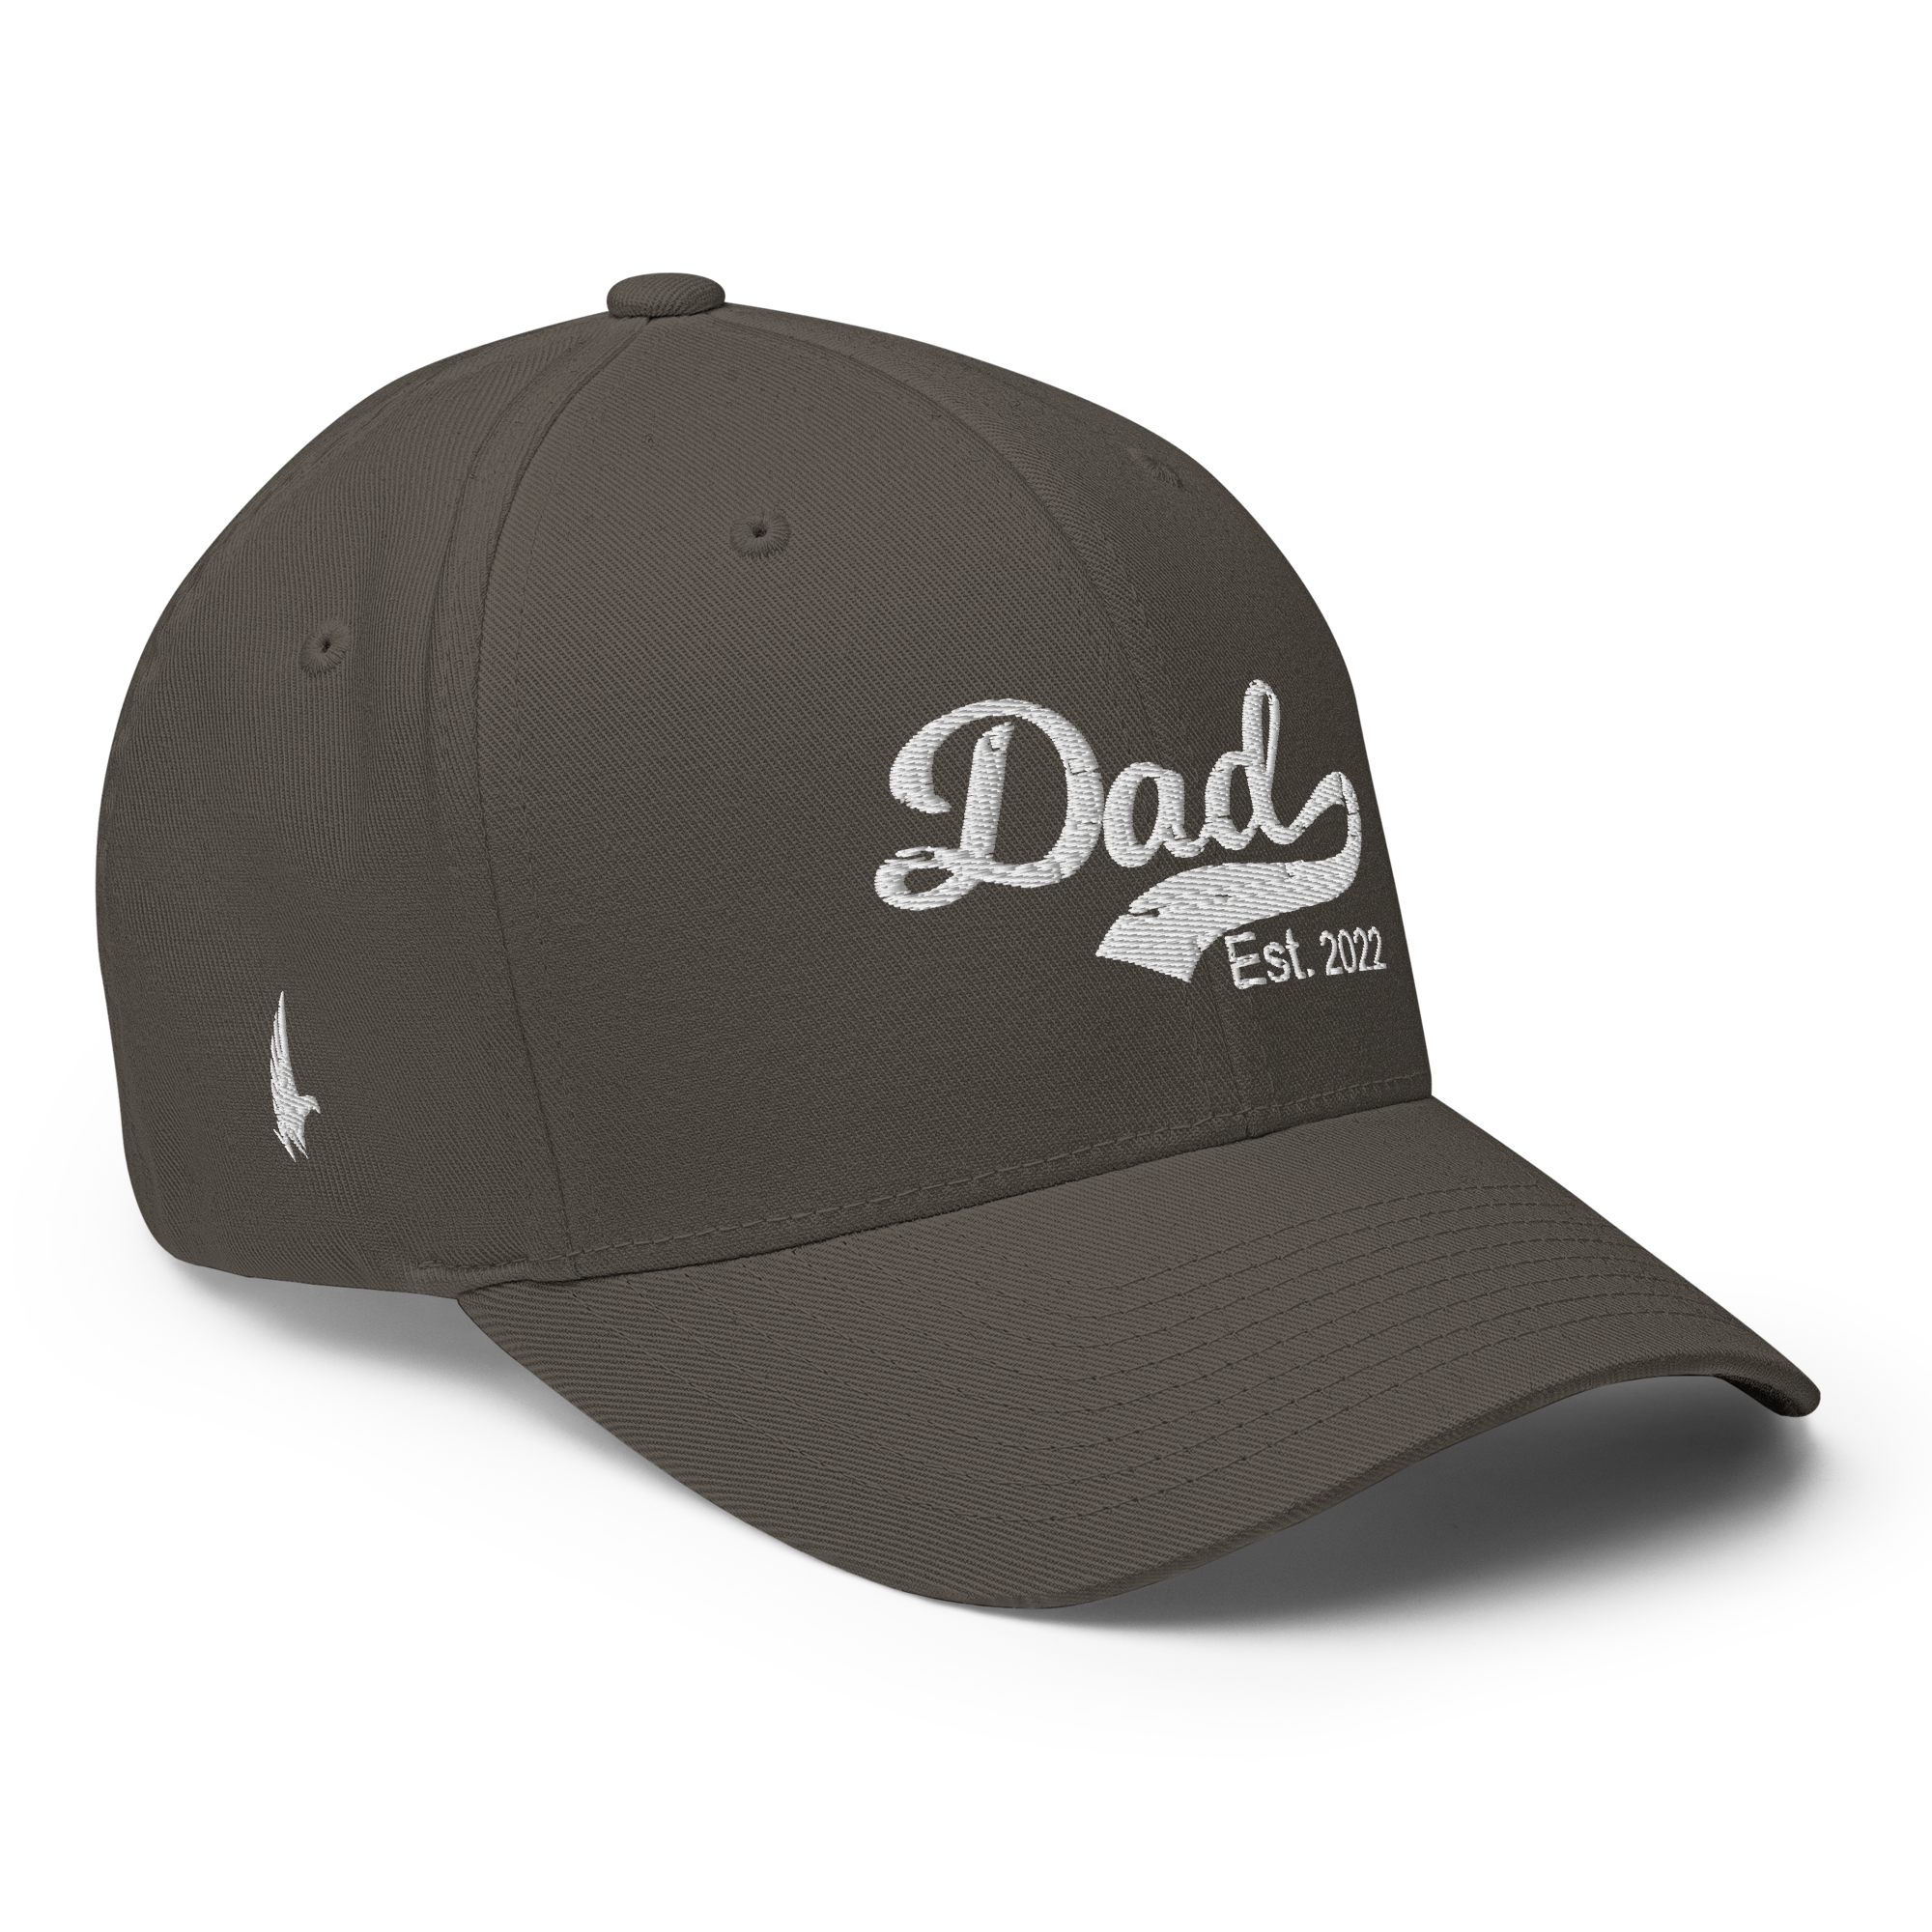 Dad Est 2022 Fitted Hat - Charcoal Grey - Loyalty Vibes